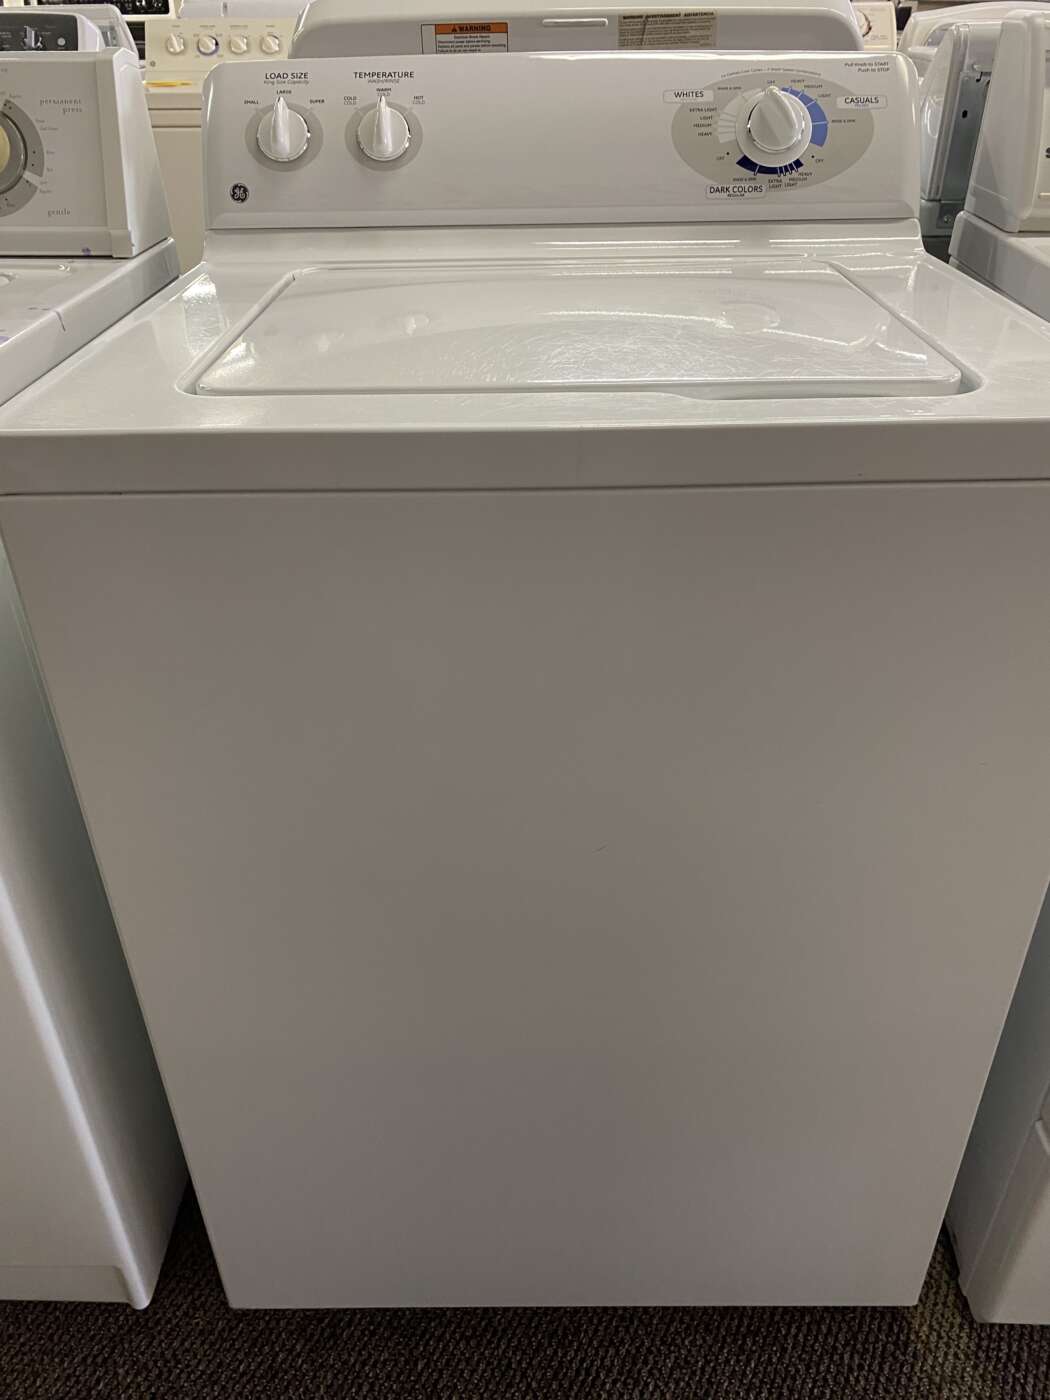 Reconditioned G/E 3.5 Cu. Ft. Top-Load Washer – White